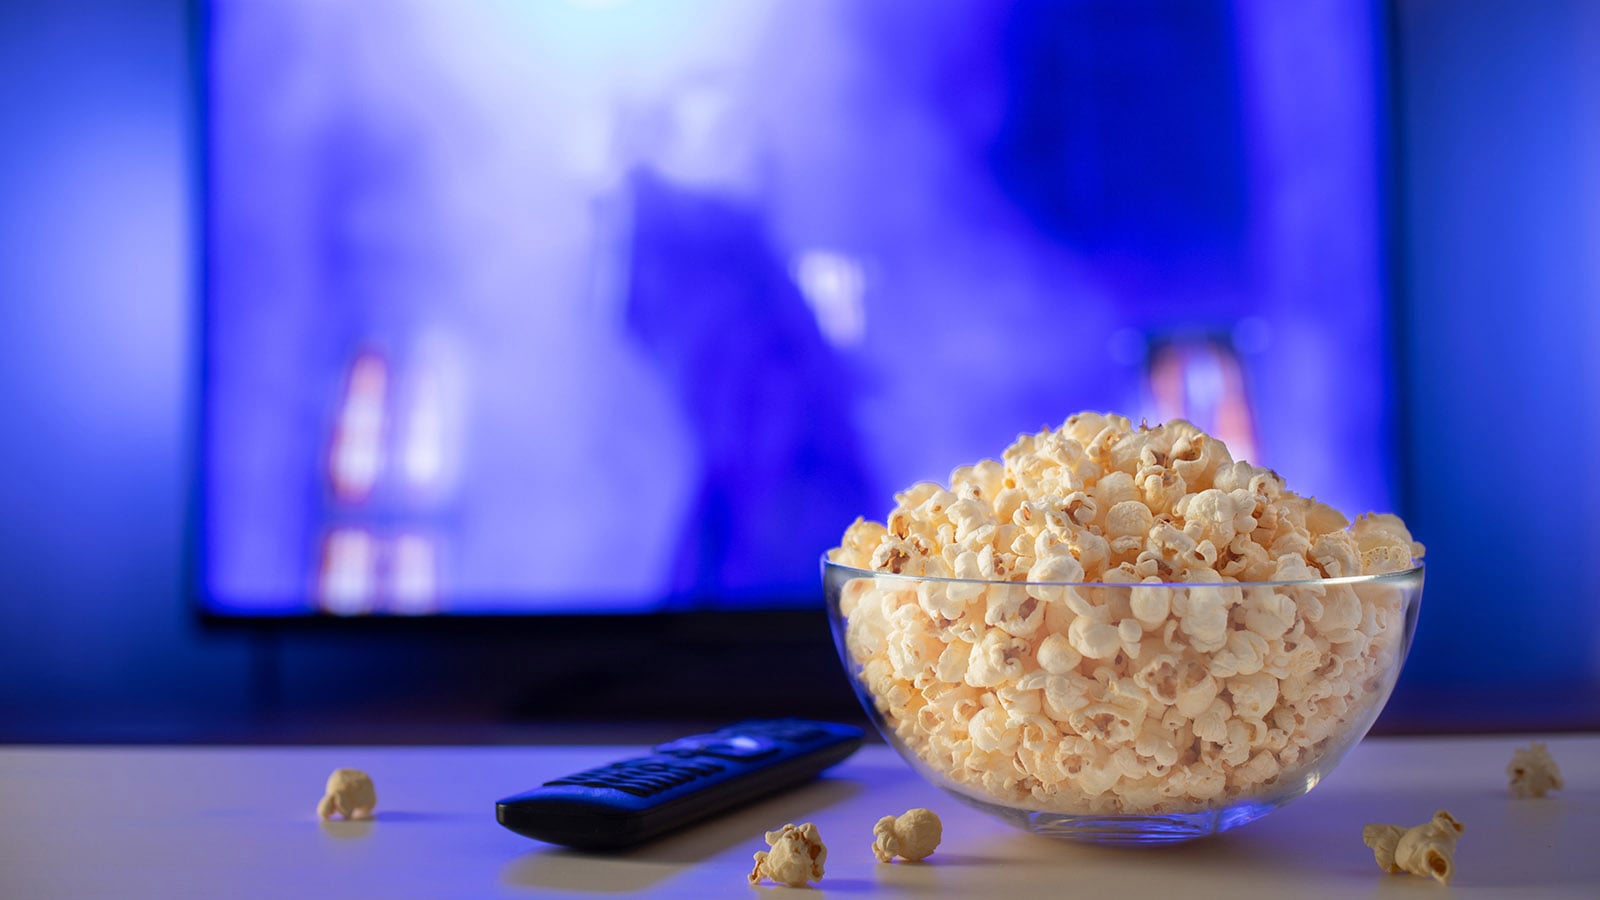 Bowl of popcorn and remote on table as film plays in background.